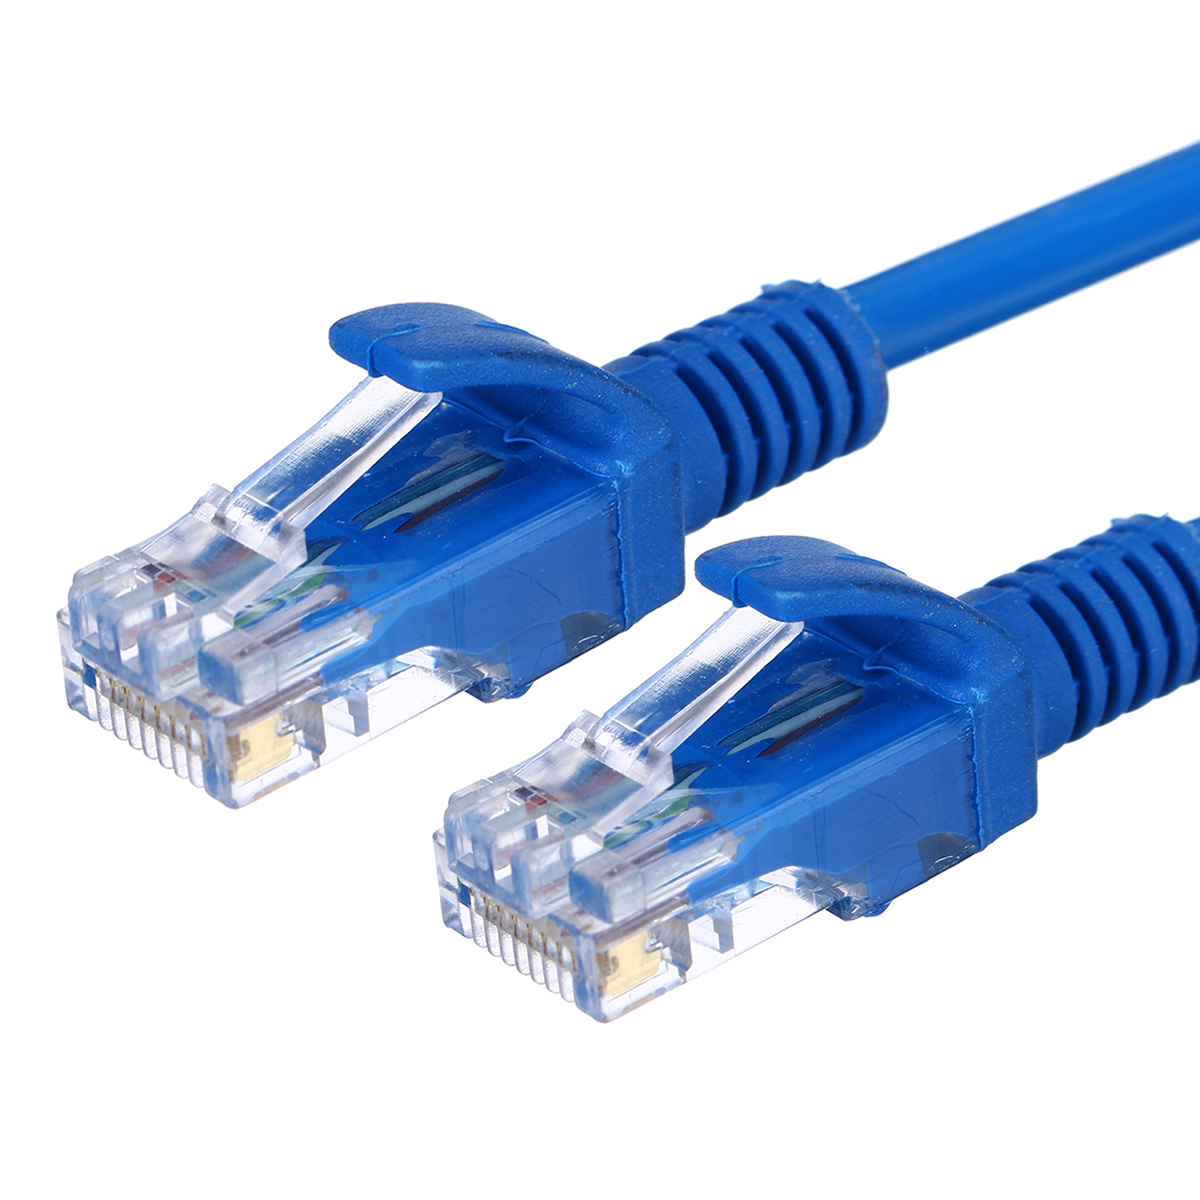 Fast-RJ-45---Male-To-Male-Network-Ethernet-LAN-Cable-Wire-10m15m20m30m50m-1567247-8